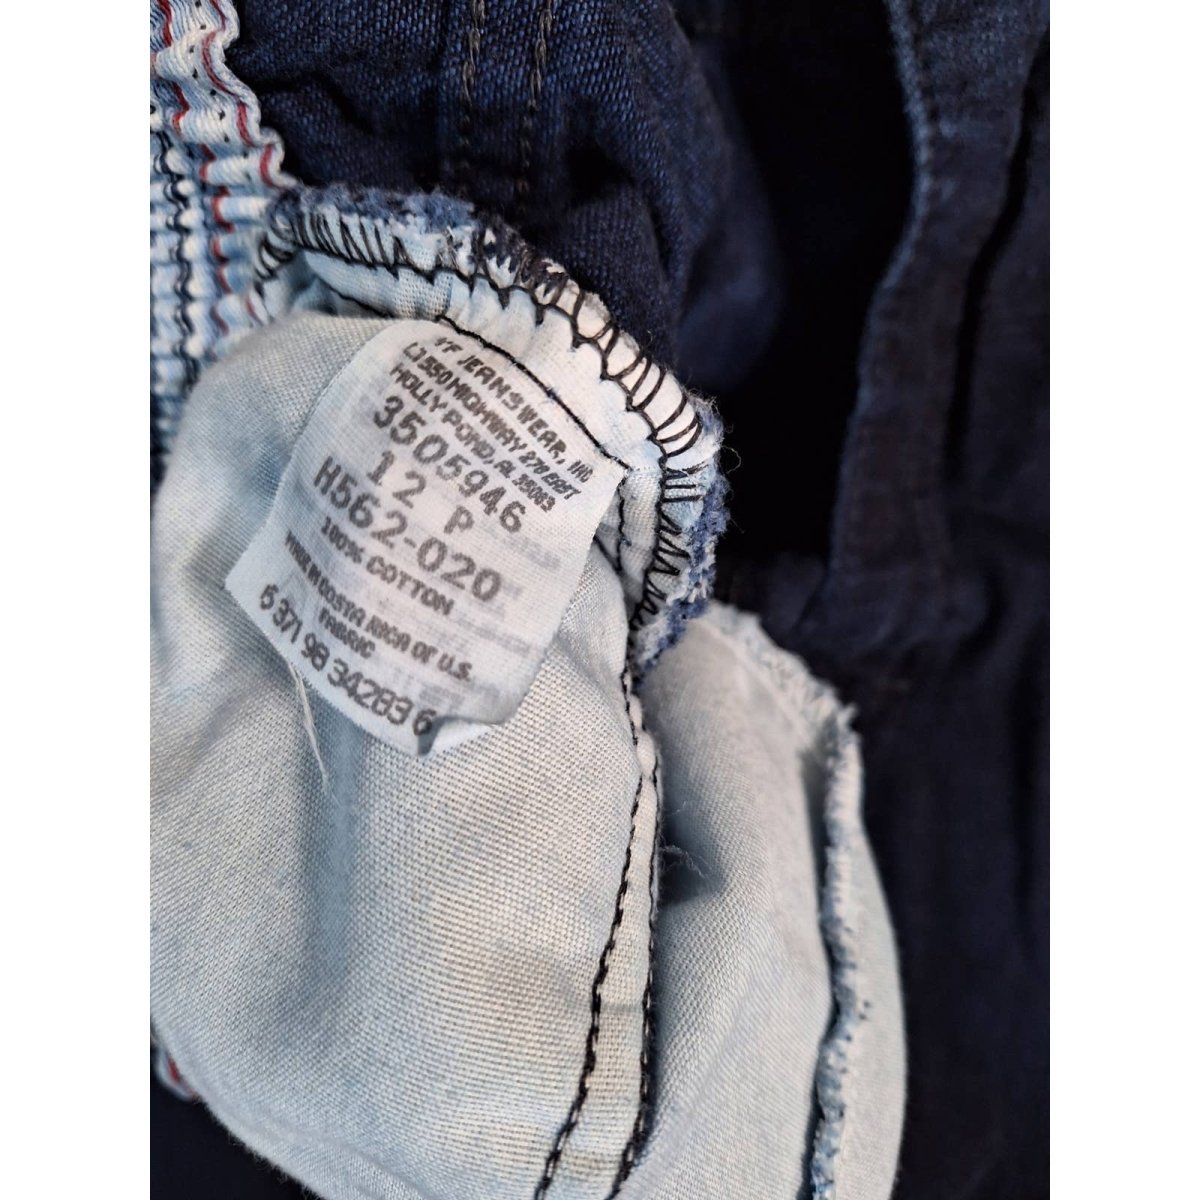 80s/90s Dark Wash All Cotton Baggy Tapered Jeans Size Medium Waist 28-32 - themallvintage The Mall Vintage